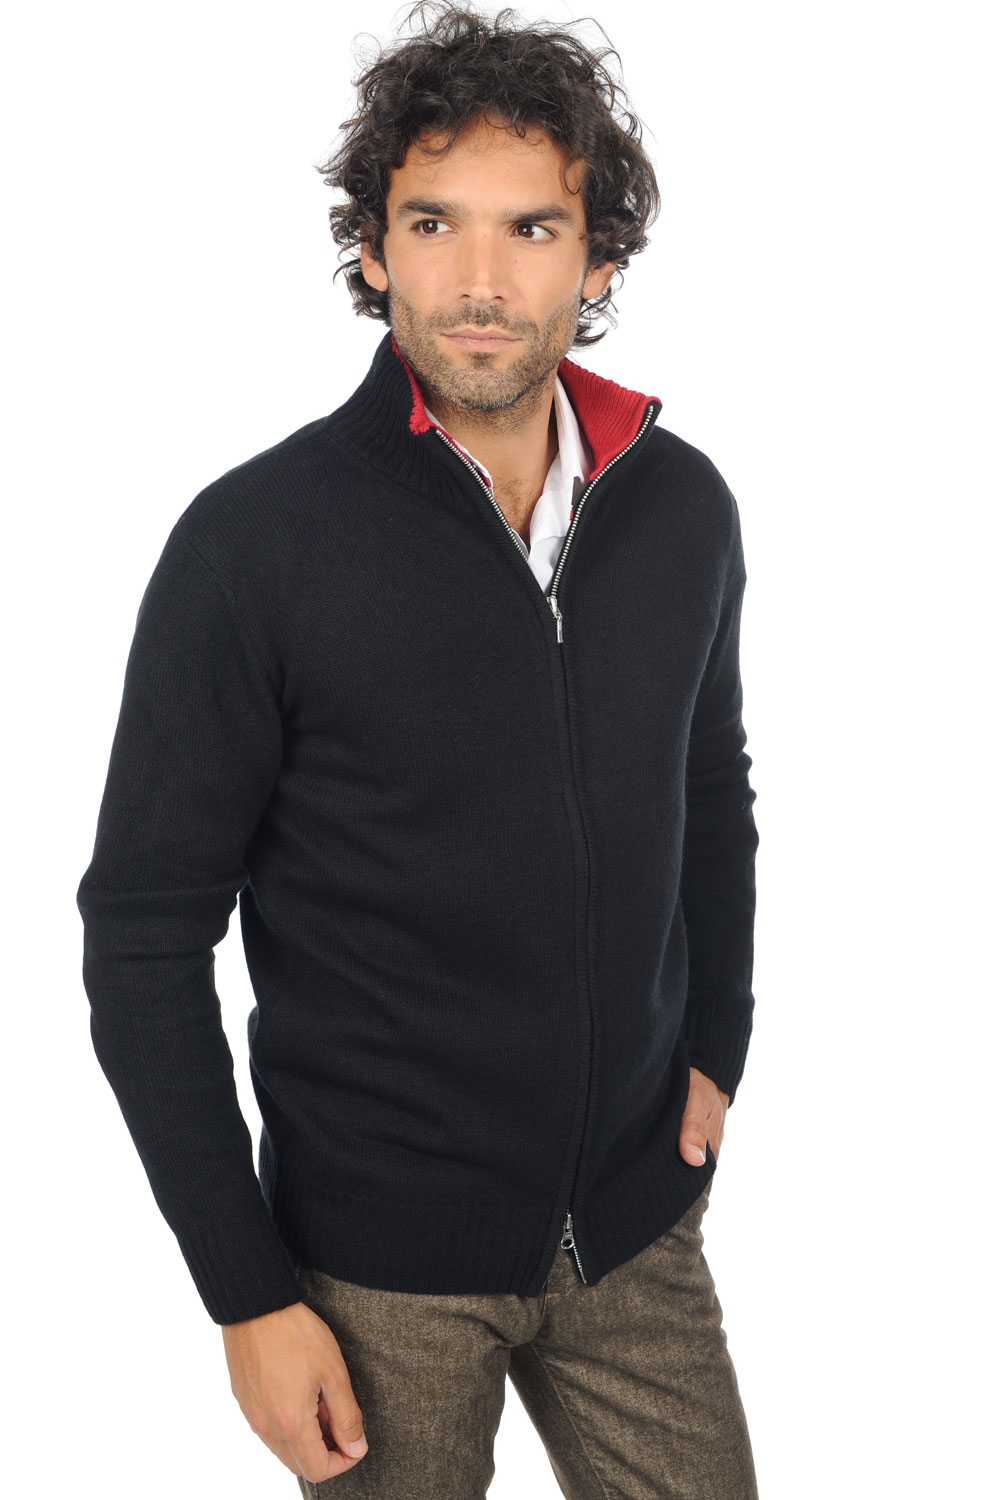 Cashmere men chunky sweater maxime black blood red xs